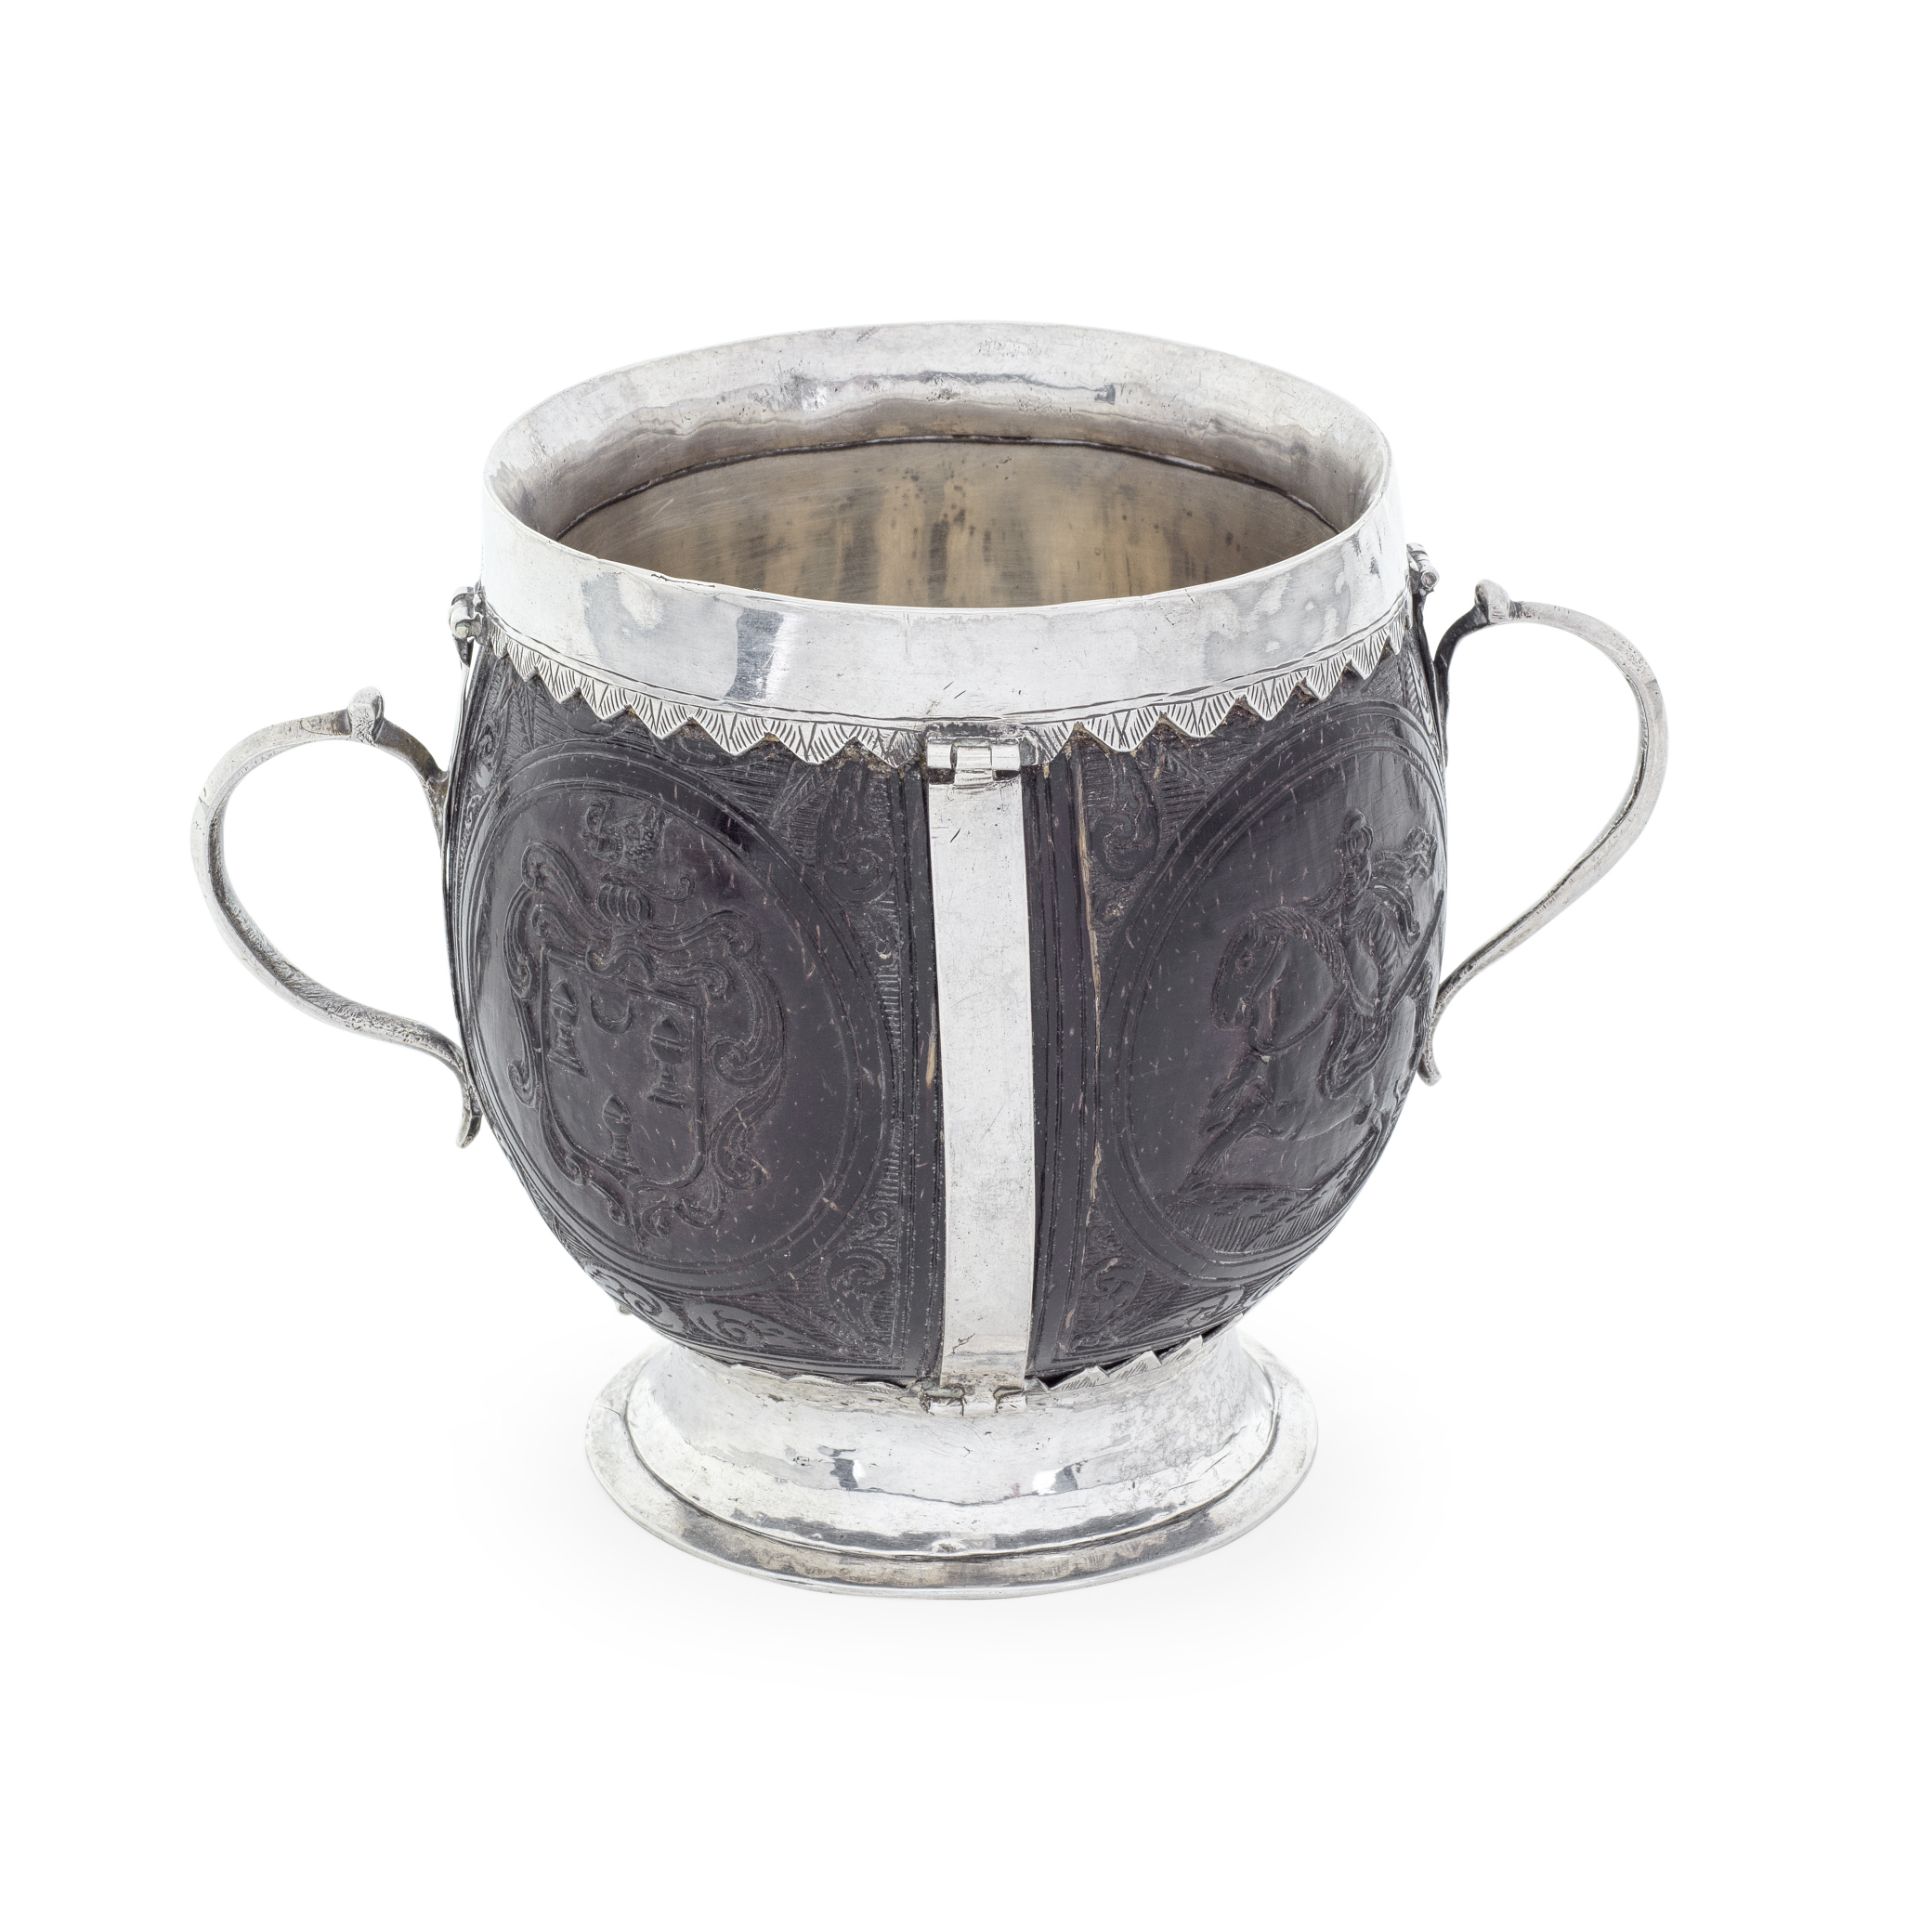 HISTORICALLY IMPORTANT: a 17th century Irish silver mounted twin-handled coconut cup unmarked